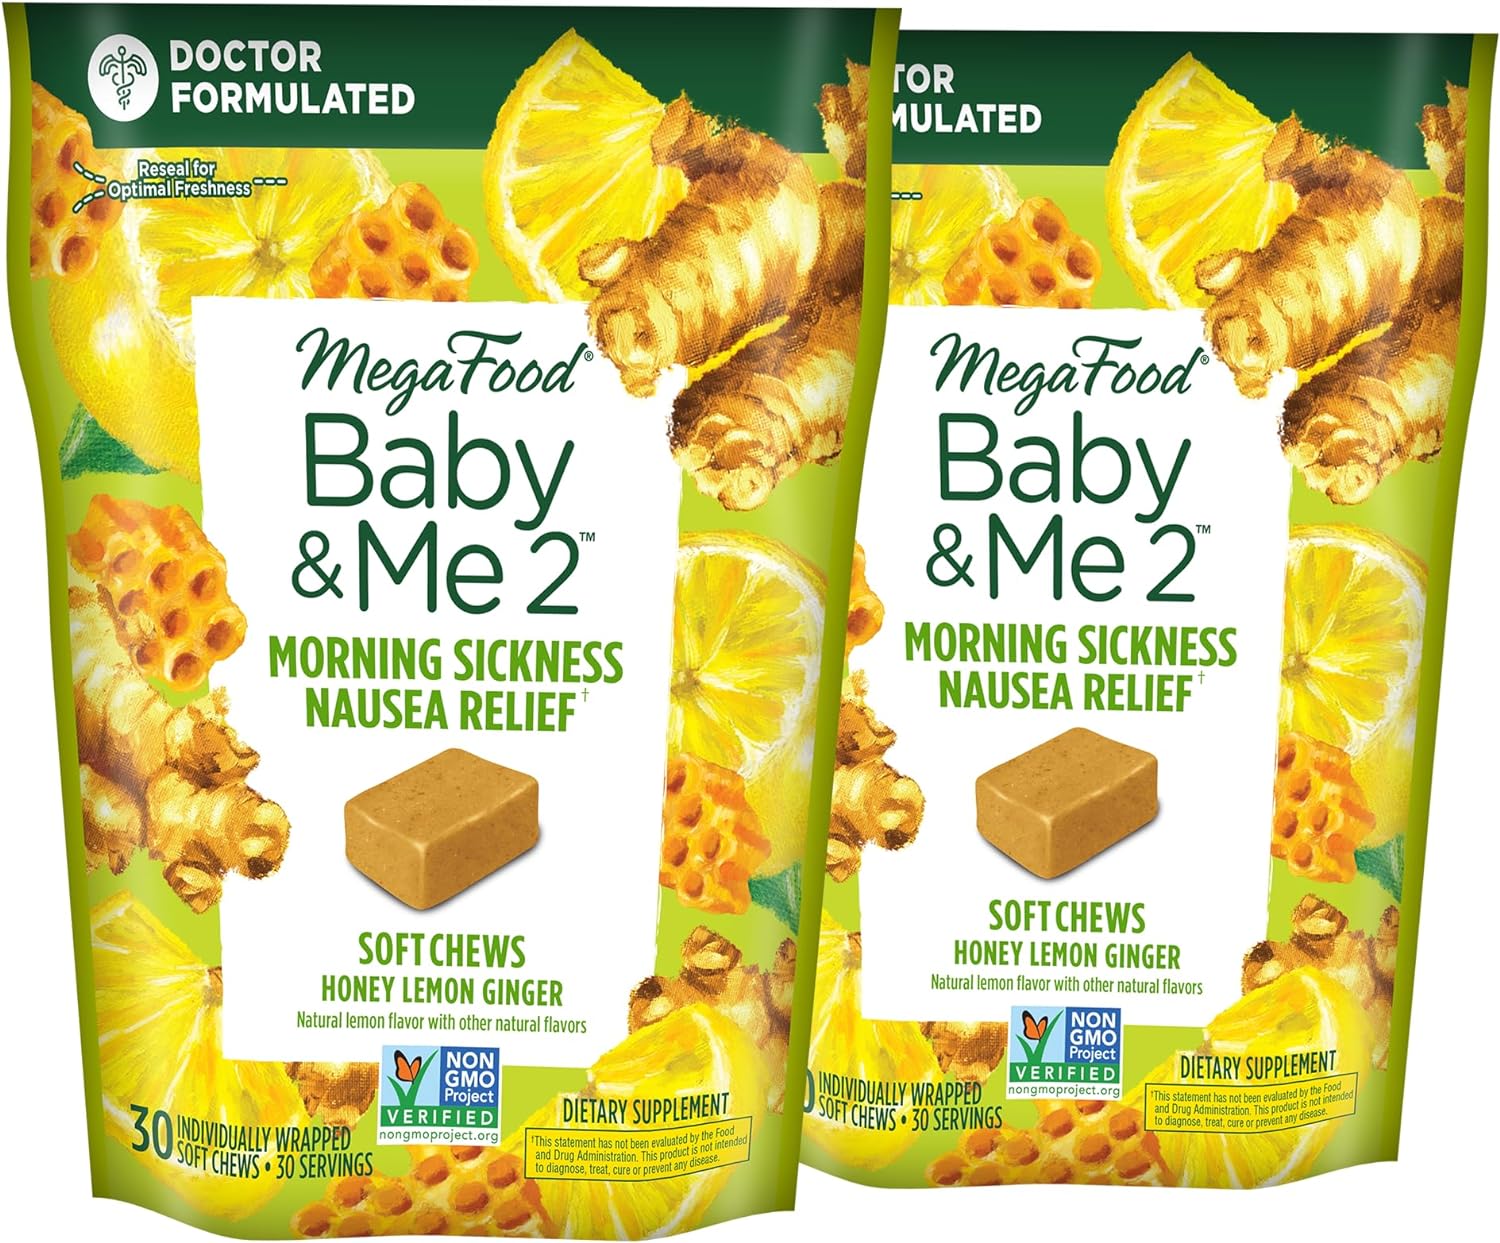 MegaFood Baby & Me 2 Prenatal Morning Sickness Relief Soft Chews -with11.2 Ounces